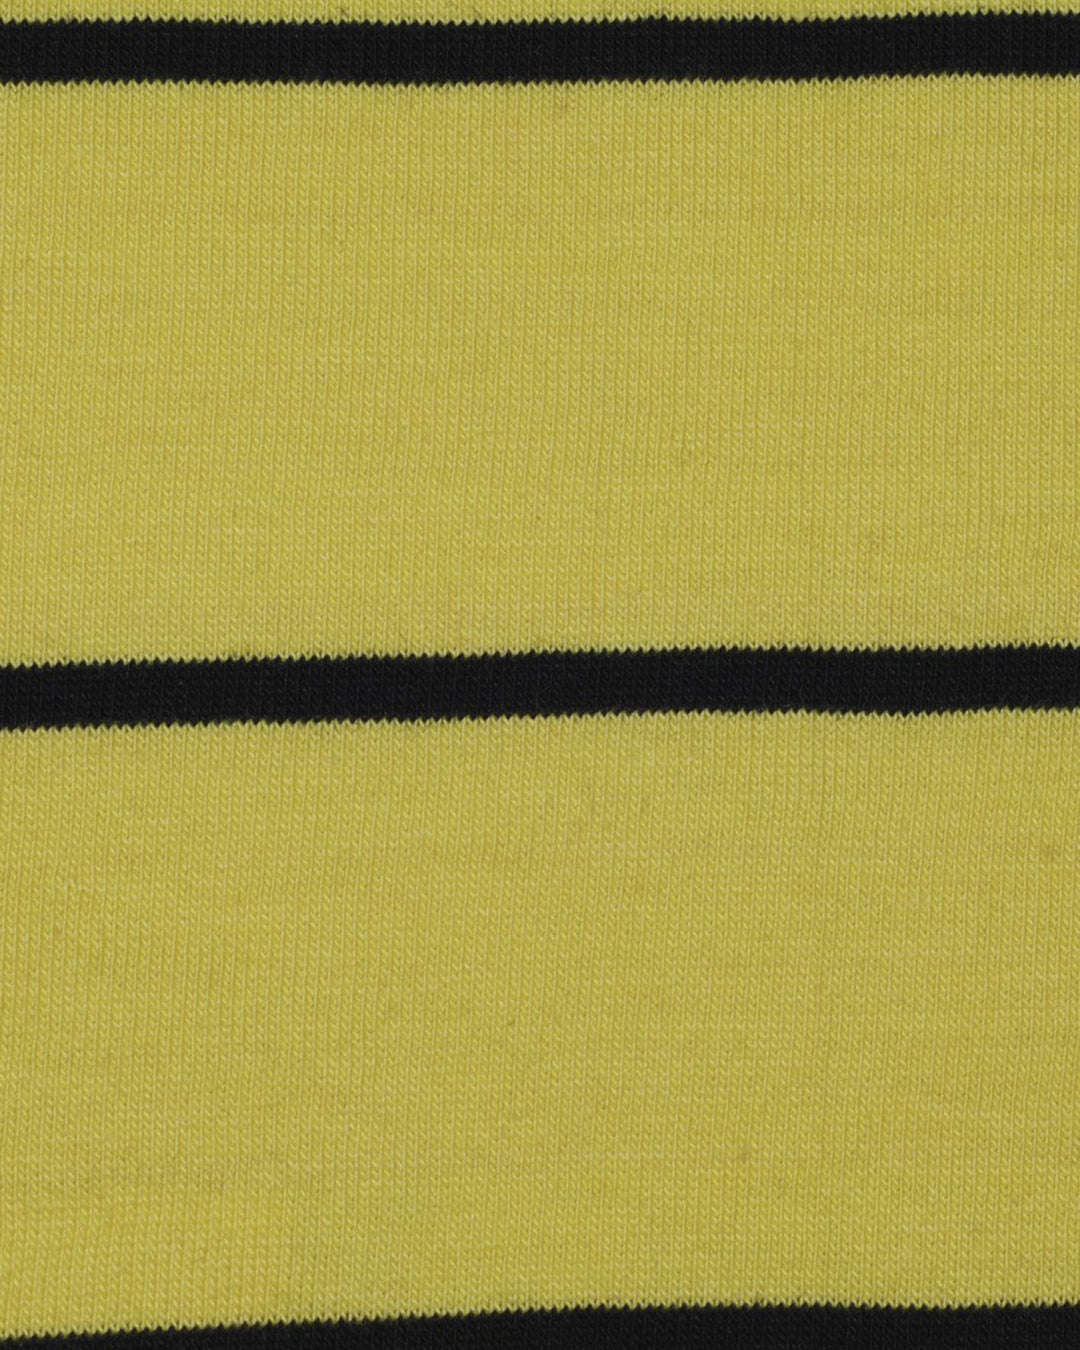 Close up of the custom oxford polo shirt for men by Luxire in yellow with black stripes